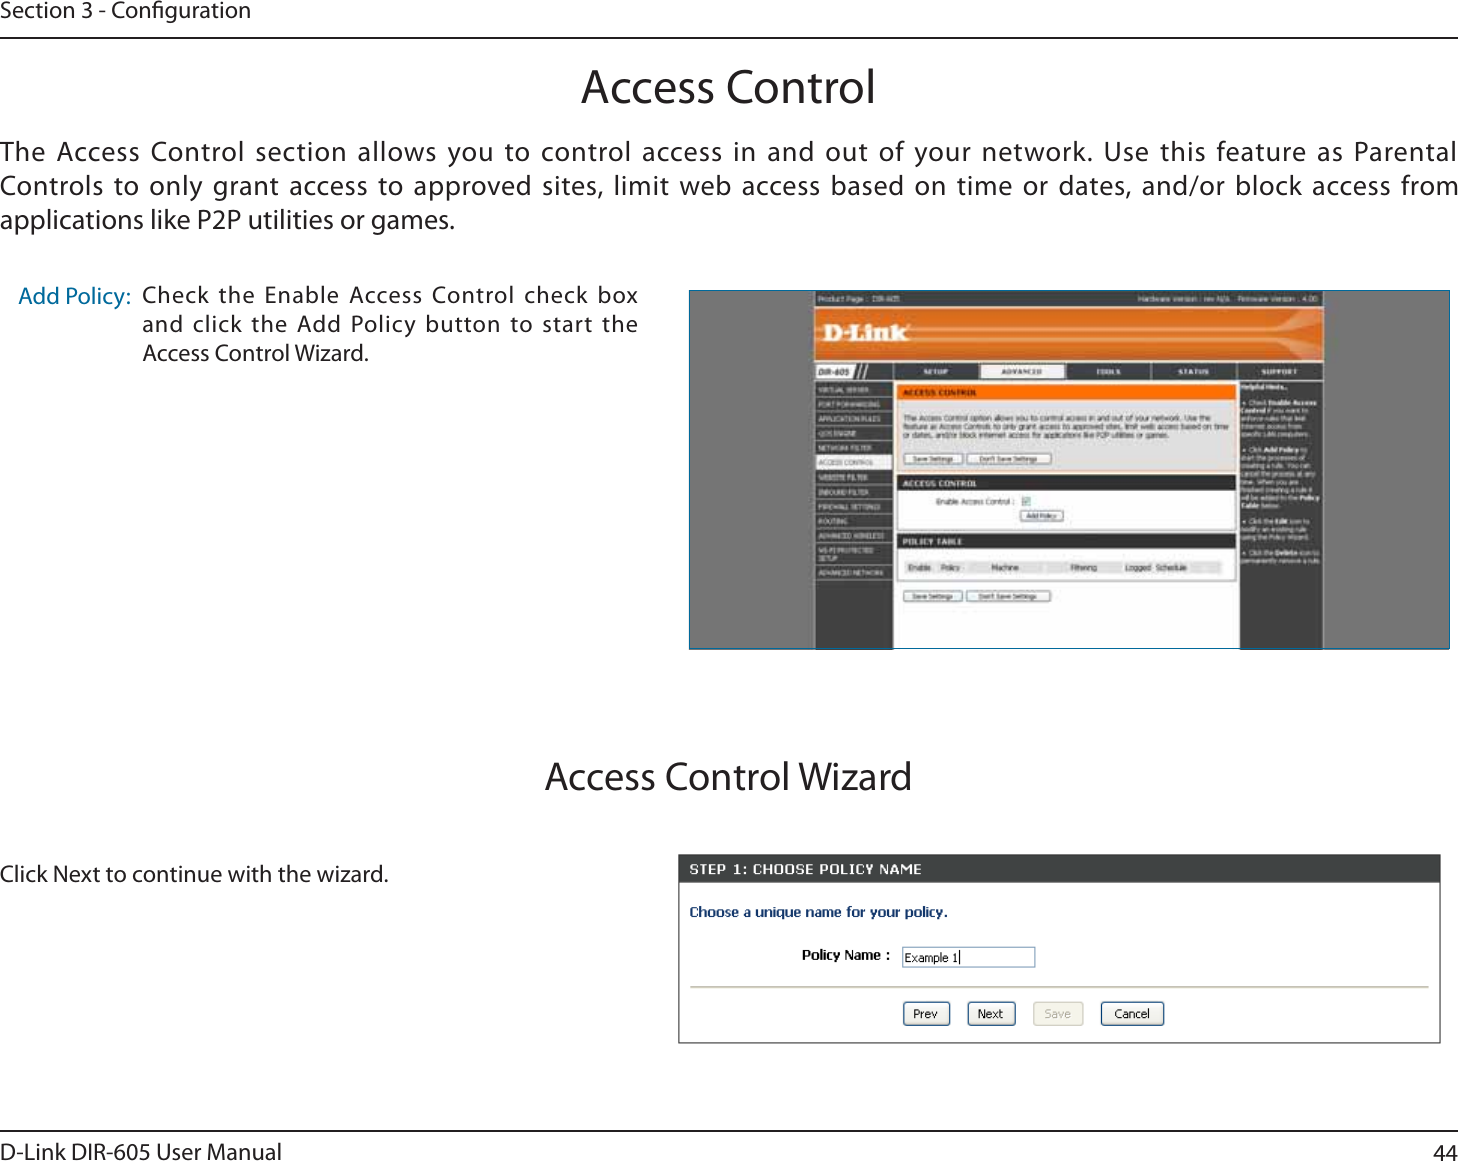 44D-Link DIR-605 User ManualSection 3 - CongurationAccess ControlCheck the Enable Access Control check box and click the Add Policy button to start the Access Control Wizard.Add Policy:The Access Control section allows you to control access in and out of your network. Use this feature as Parental Controls to only grant access to approved sites, limit web access based on time or dates, and/or block access from applications like P2P utilities or games.Click Next to continue with the wizard.Access Control Wizard